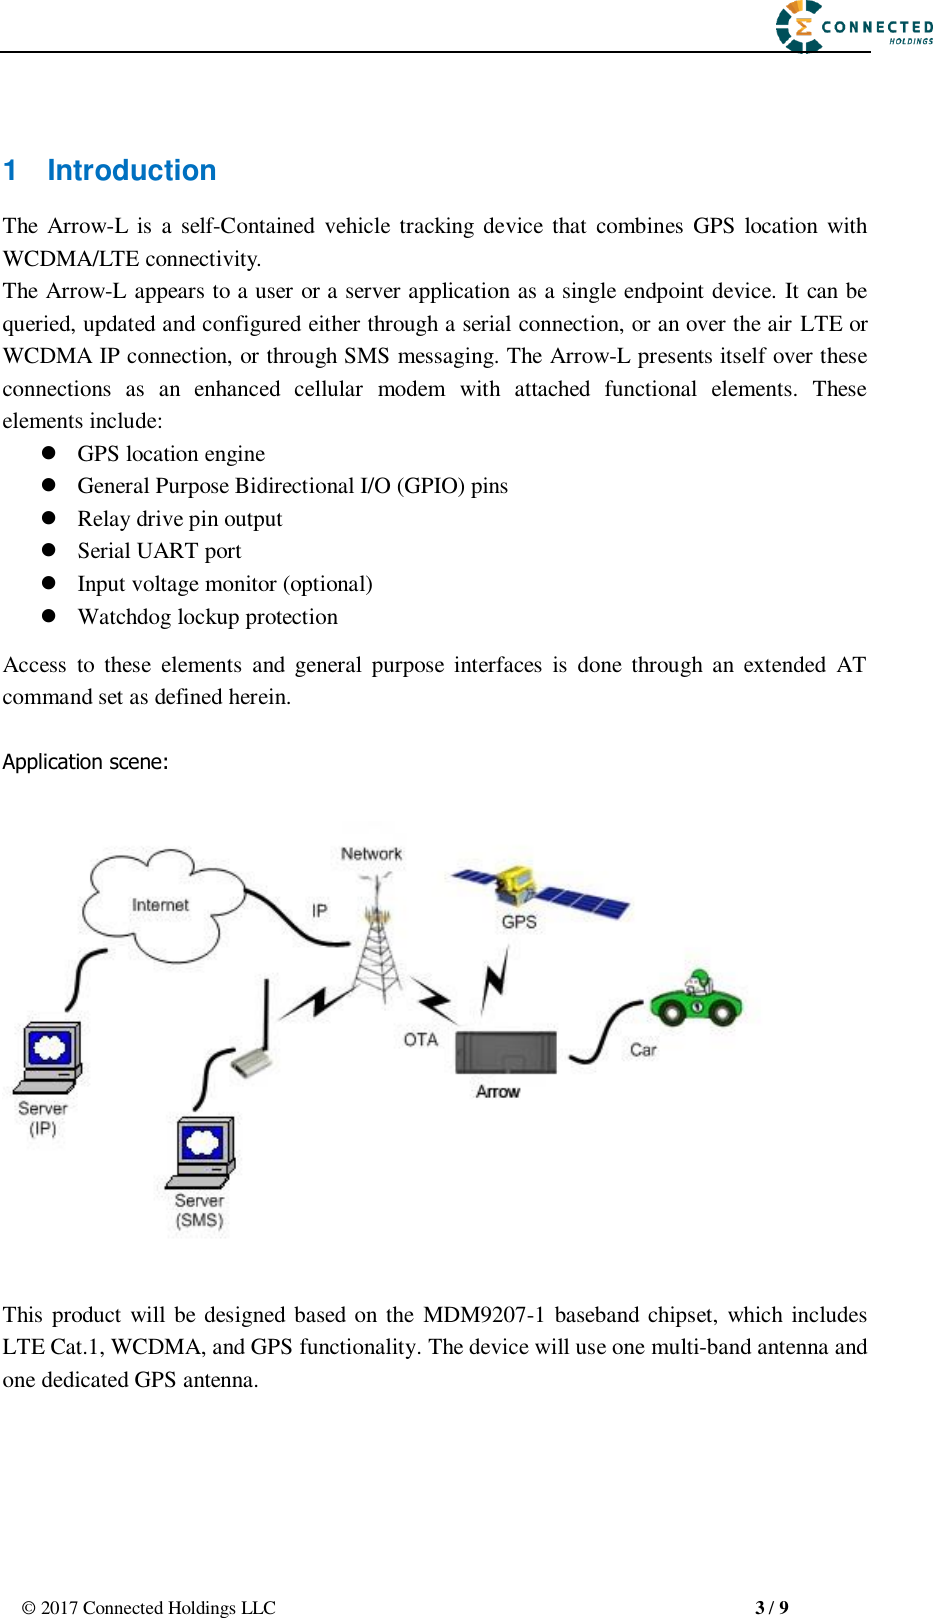                                                       ©  2017 Connected Holdings LLC                                                   3 / 9  1  Introduction The  Arrow-L  is a  self-Contained  vehicle tracking device  that  combines GPS  location with WCDMA/LTE connectivity. The Arrow-L appears to a user or a server application as a single endpoint device. It can be queried, updated and configured either through a serial connection, or an over the air LTE or WCDMA IP connection, or through SMS messaging. The Arrow-L presents itself over these connections  as  an  enhanced  cellular  modem  with  attached  functional  elements.  These elements include:    GPS location engine    General Purpose Bidirectional I/O (GPIO) pins    Relay drive pin output    Serial UART port    Input voltage monitor (optional)  Watchdog lockup protection   Access  to  these  elements  and  general  purpose  interfaces  is  done  through  an  extended  AT command set as defined herein.  Application scene:    This product will be designed based on the  MDM9207-1  baseband  chipset, which includes LTE Cat.1, WCDMA, and GPS functionality. The device will use one multi-band antenna and one dedicated GPS antenna.    